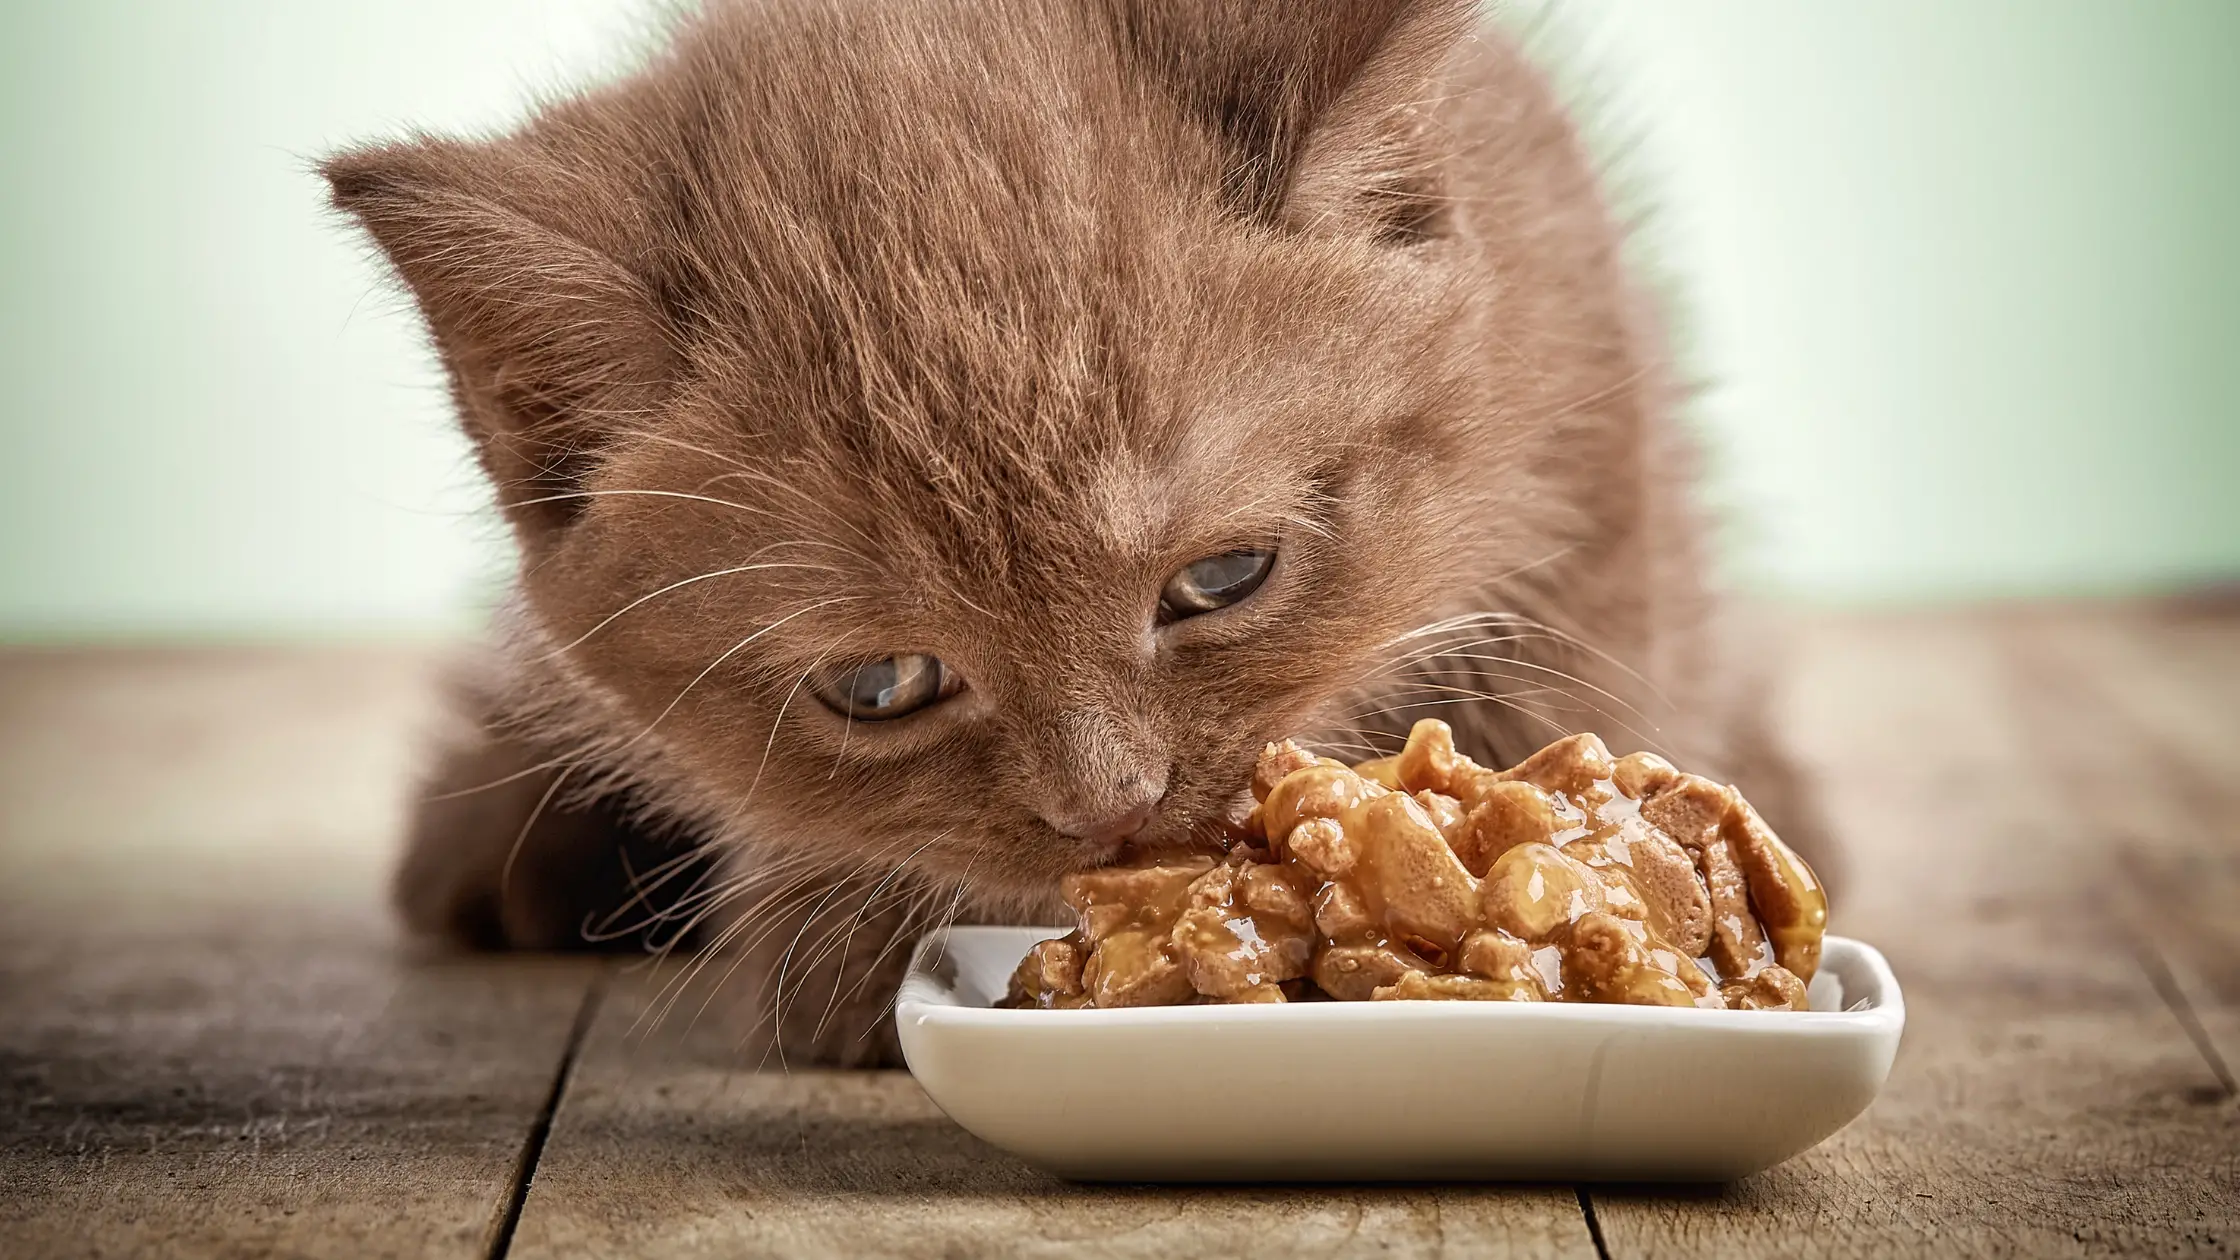 WHAT HAPPENS IF A CAT EATS EXPIRED CAT FOOD?